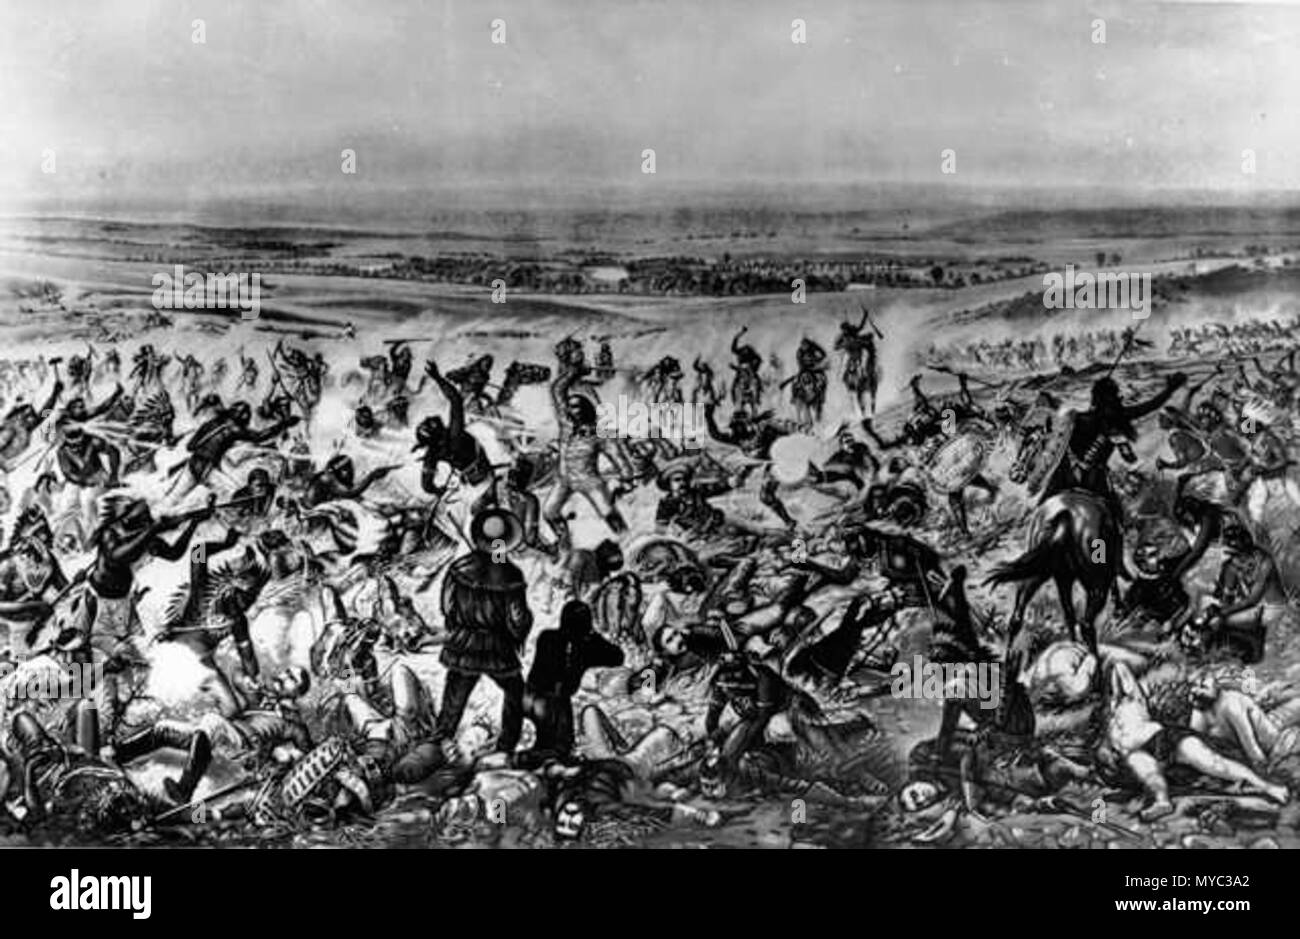 . Title: Custer's last stand Caption: Native American Lakota Sioux, Crow, Northern, and Cheyenne, defeat General Custer standing center, wearing buckskin, with few of his soldiers of the Seventh Cavalry still standing, Little Bighorn Battlefield, June 26, 1876 Little Bighorn River, Montana. Template:Denver Public Library public domain images . User Lordkinbote on en.wikipedia 128 Custer's last stand painting Stock Photo